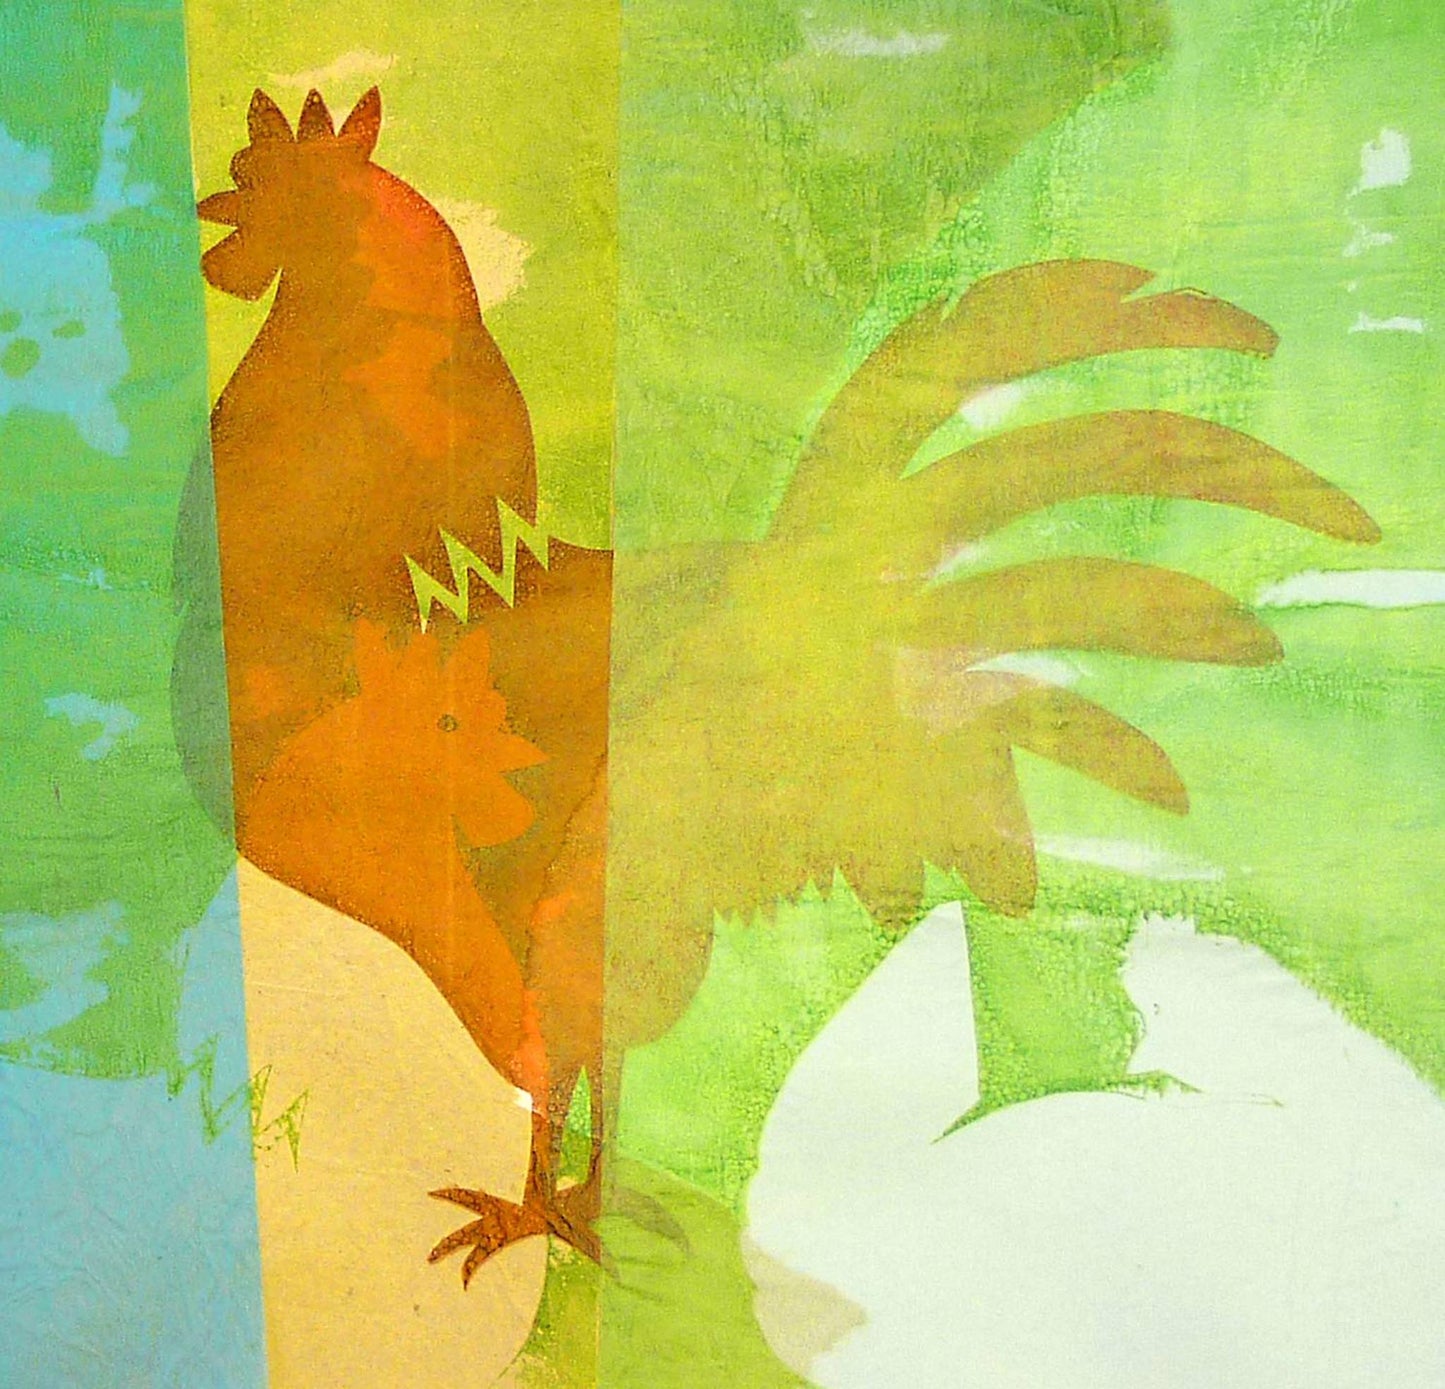 Tin of 6 Greetings Cards - Note cards - Chickens - recycled - Handmade - by Norfolk based artist Debbie Osborn